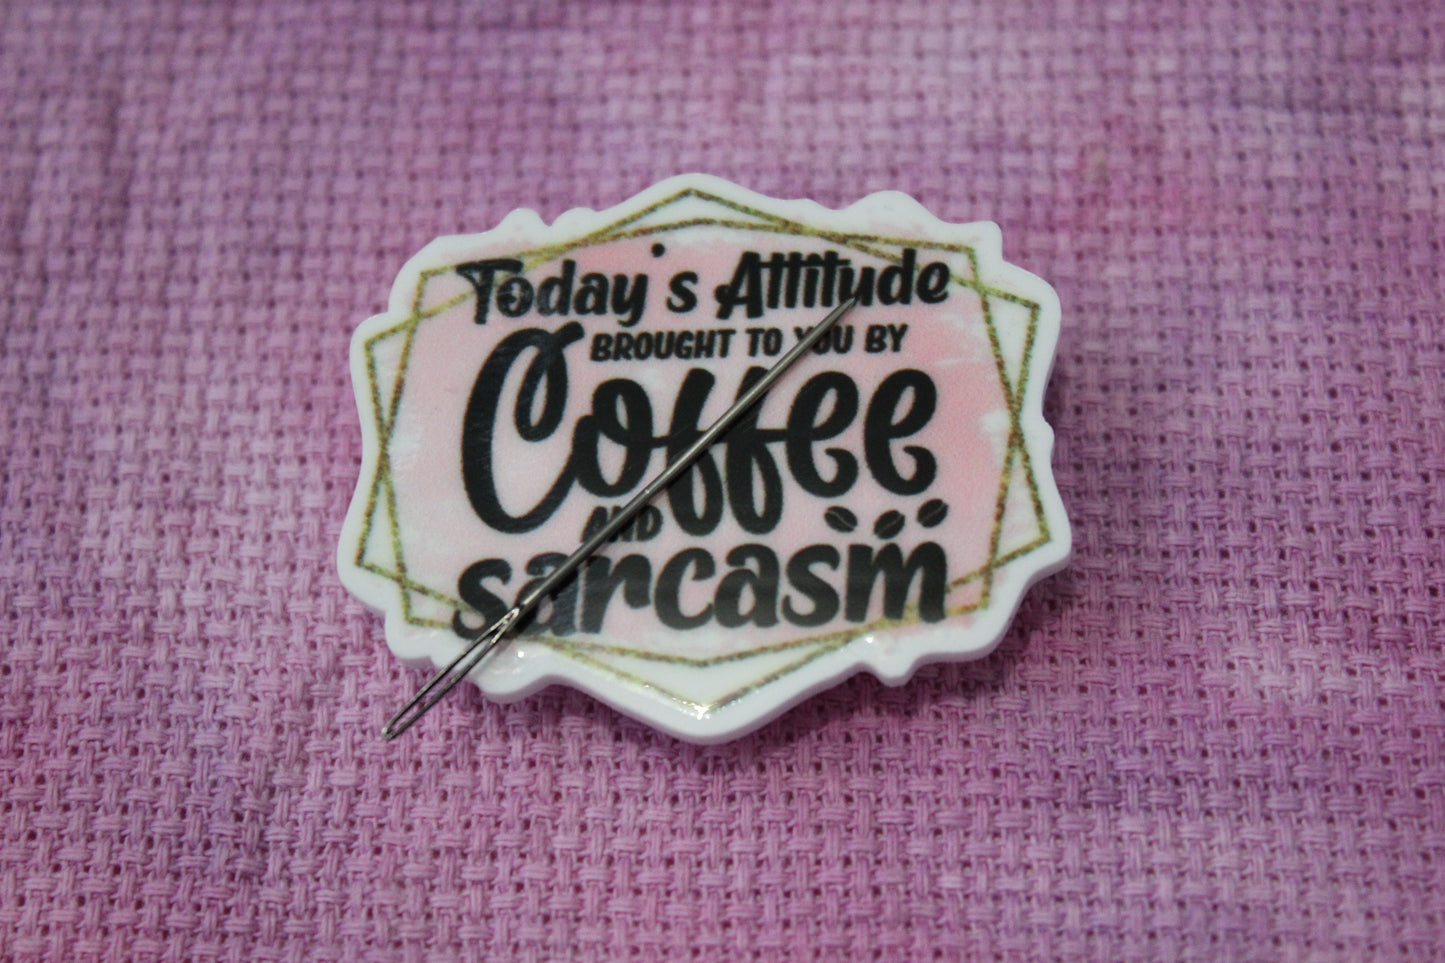 Today's Attitude Is Brought To You By Coffee And Sarcasm